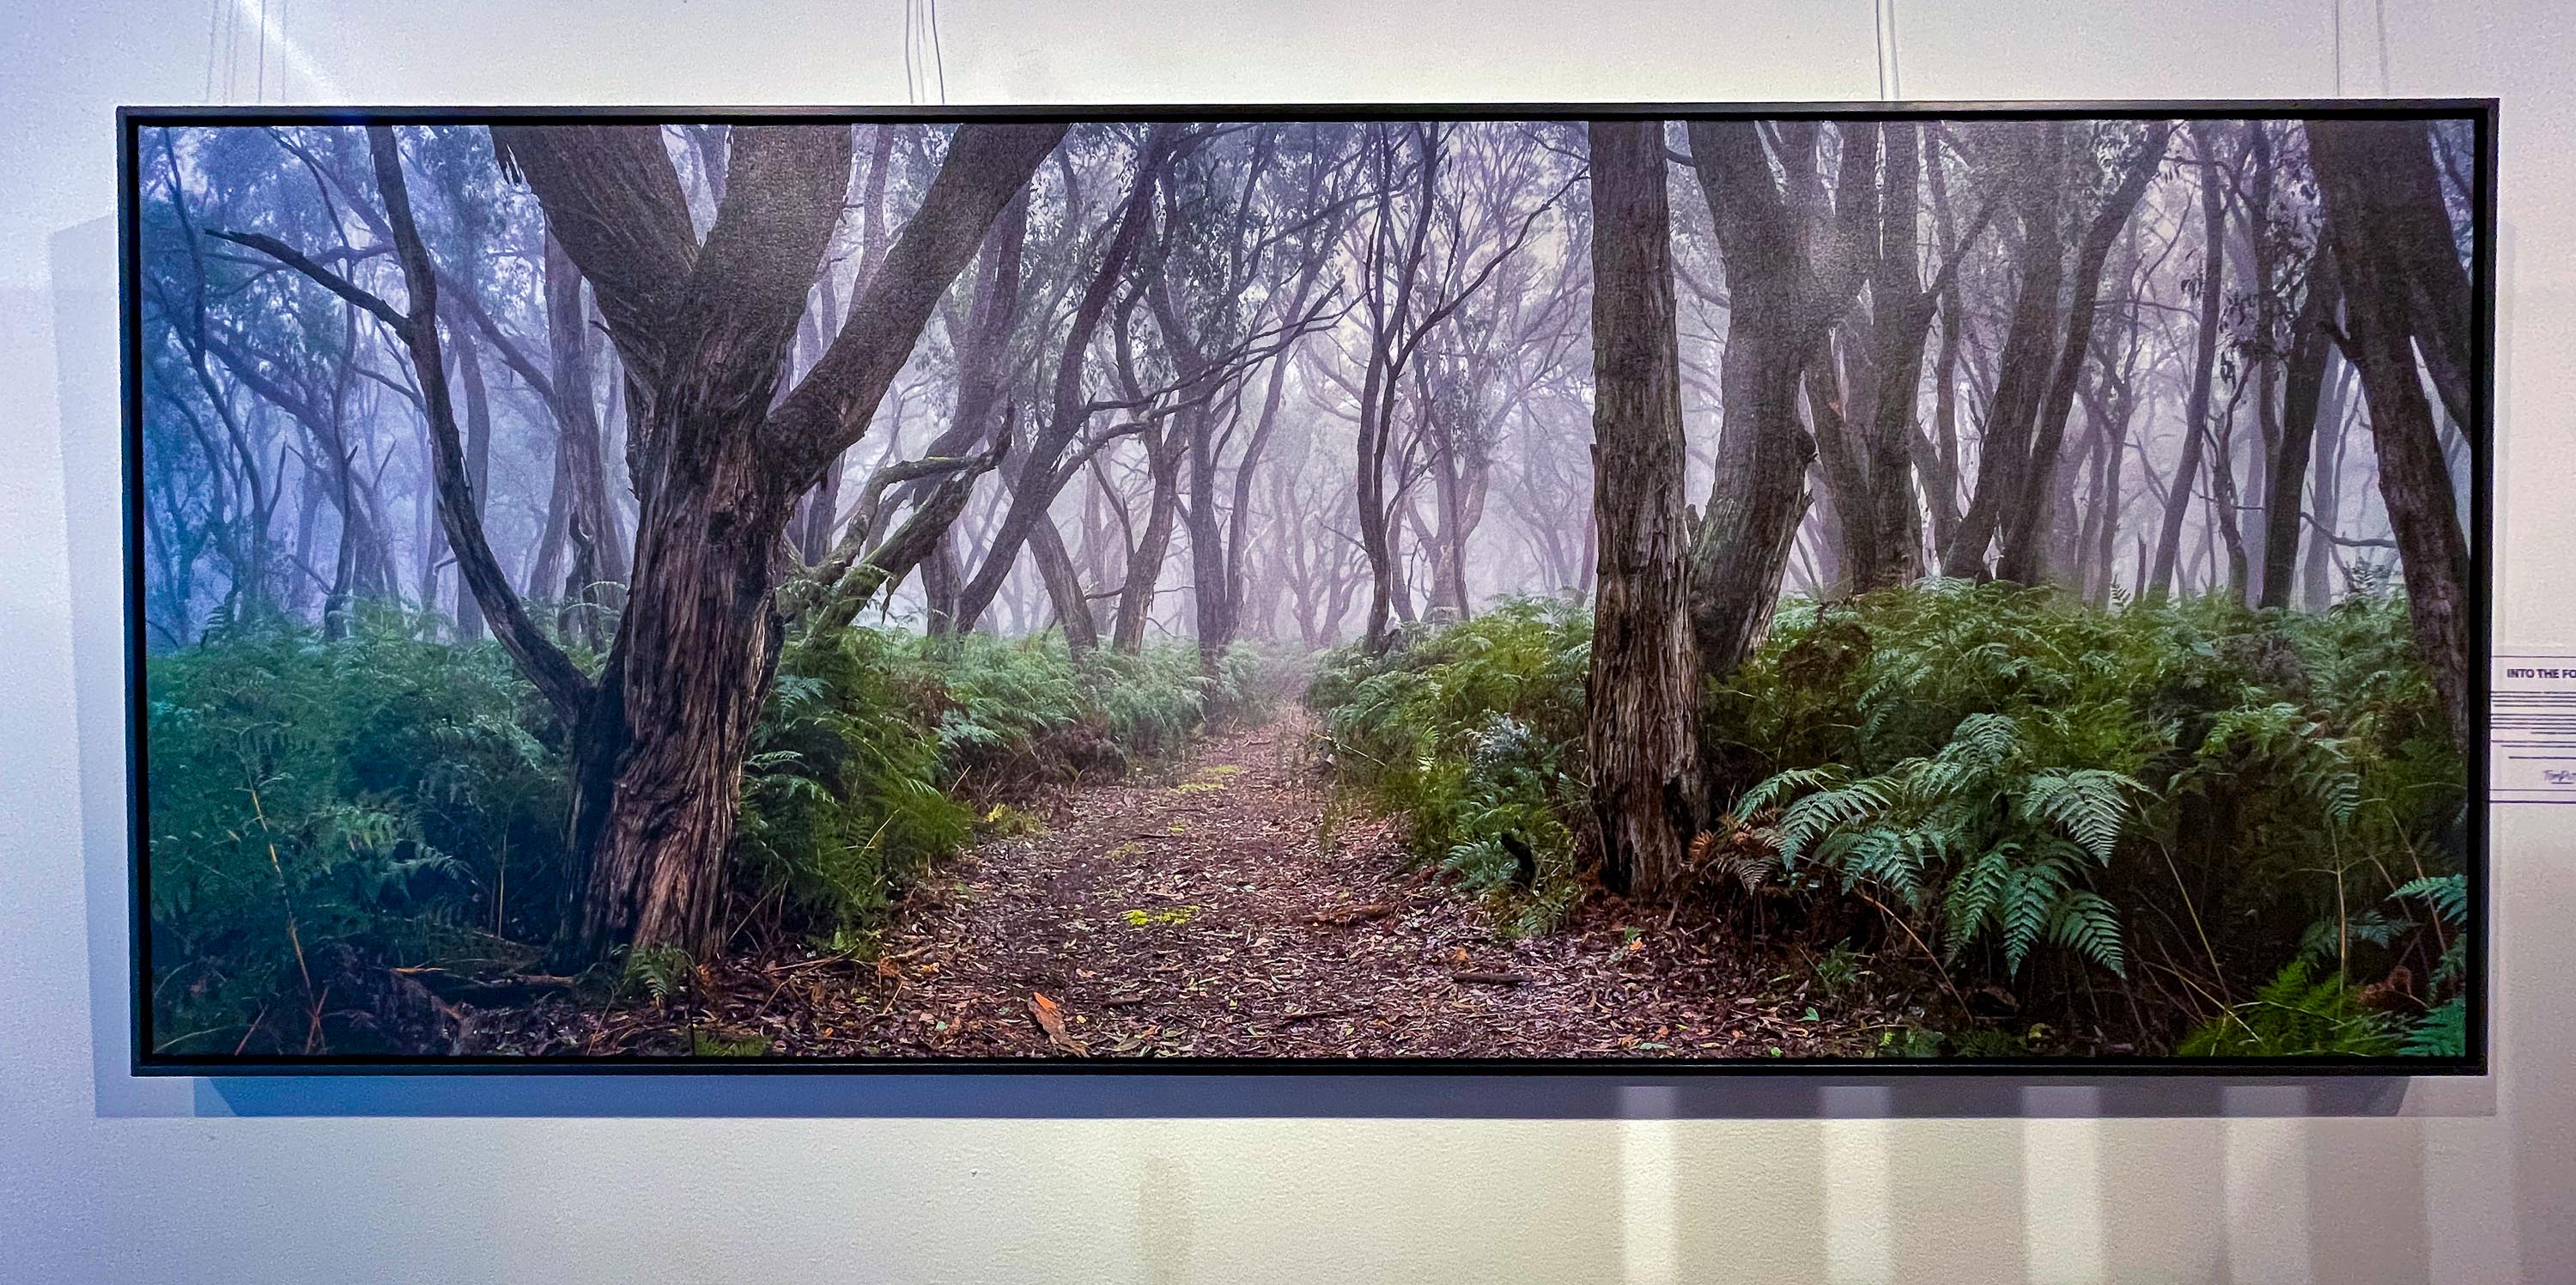 ARTWORK INSTOCK -  Into the Forest - Available 200 x 83cms Black Framed Canvas Print in the gallery TODAY!